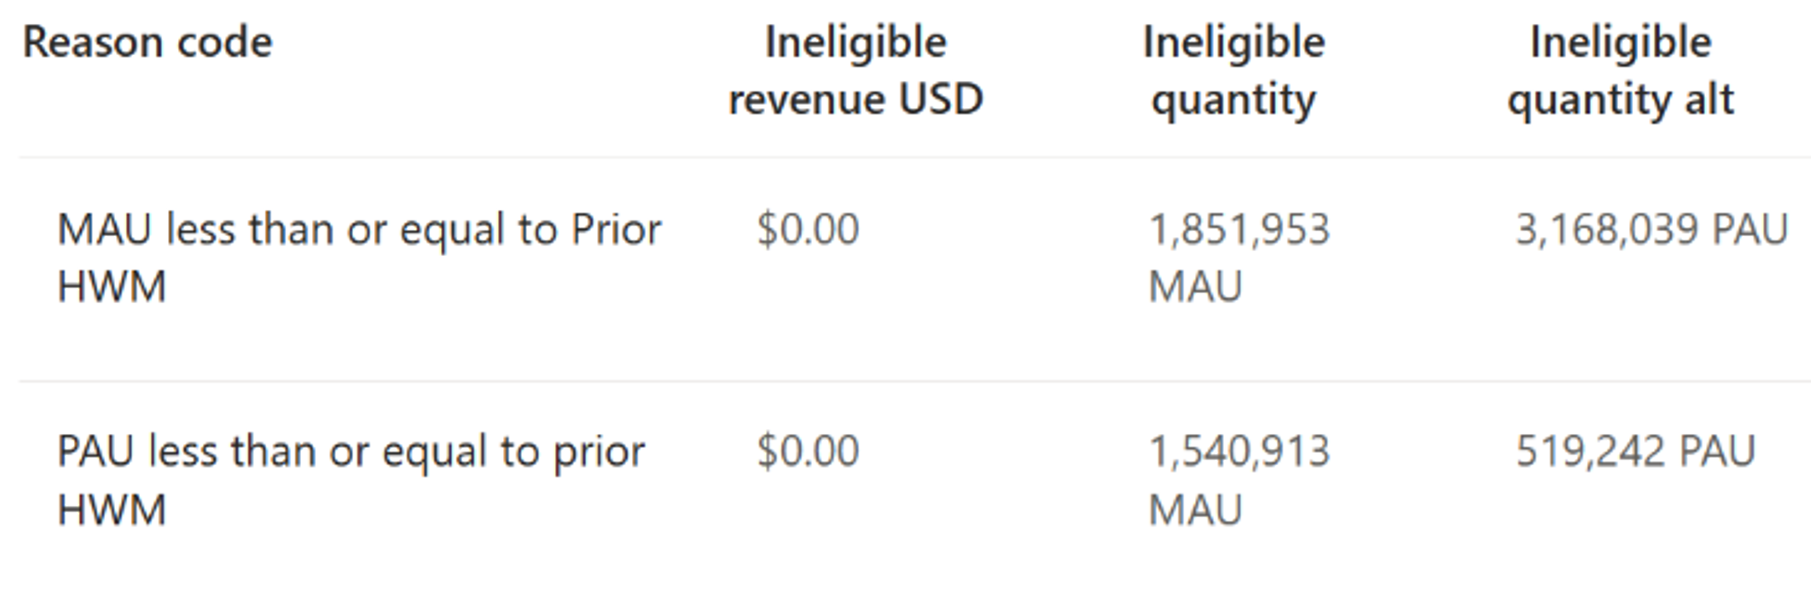 Screenshot of the Revenue summary page, with reason codes, ineligible revenue, ineligible quantity, and ineligible quantity alt shown.